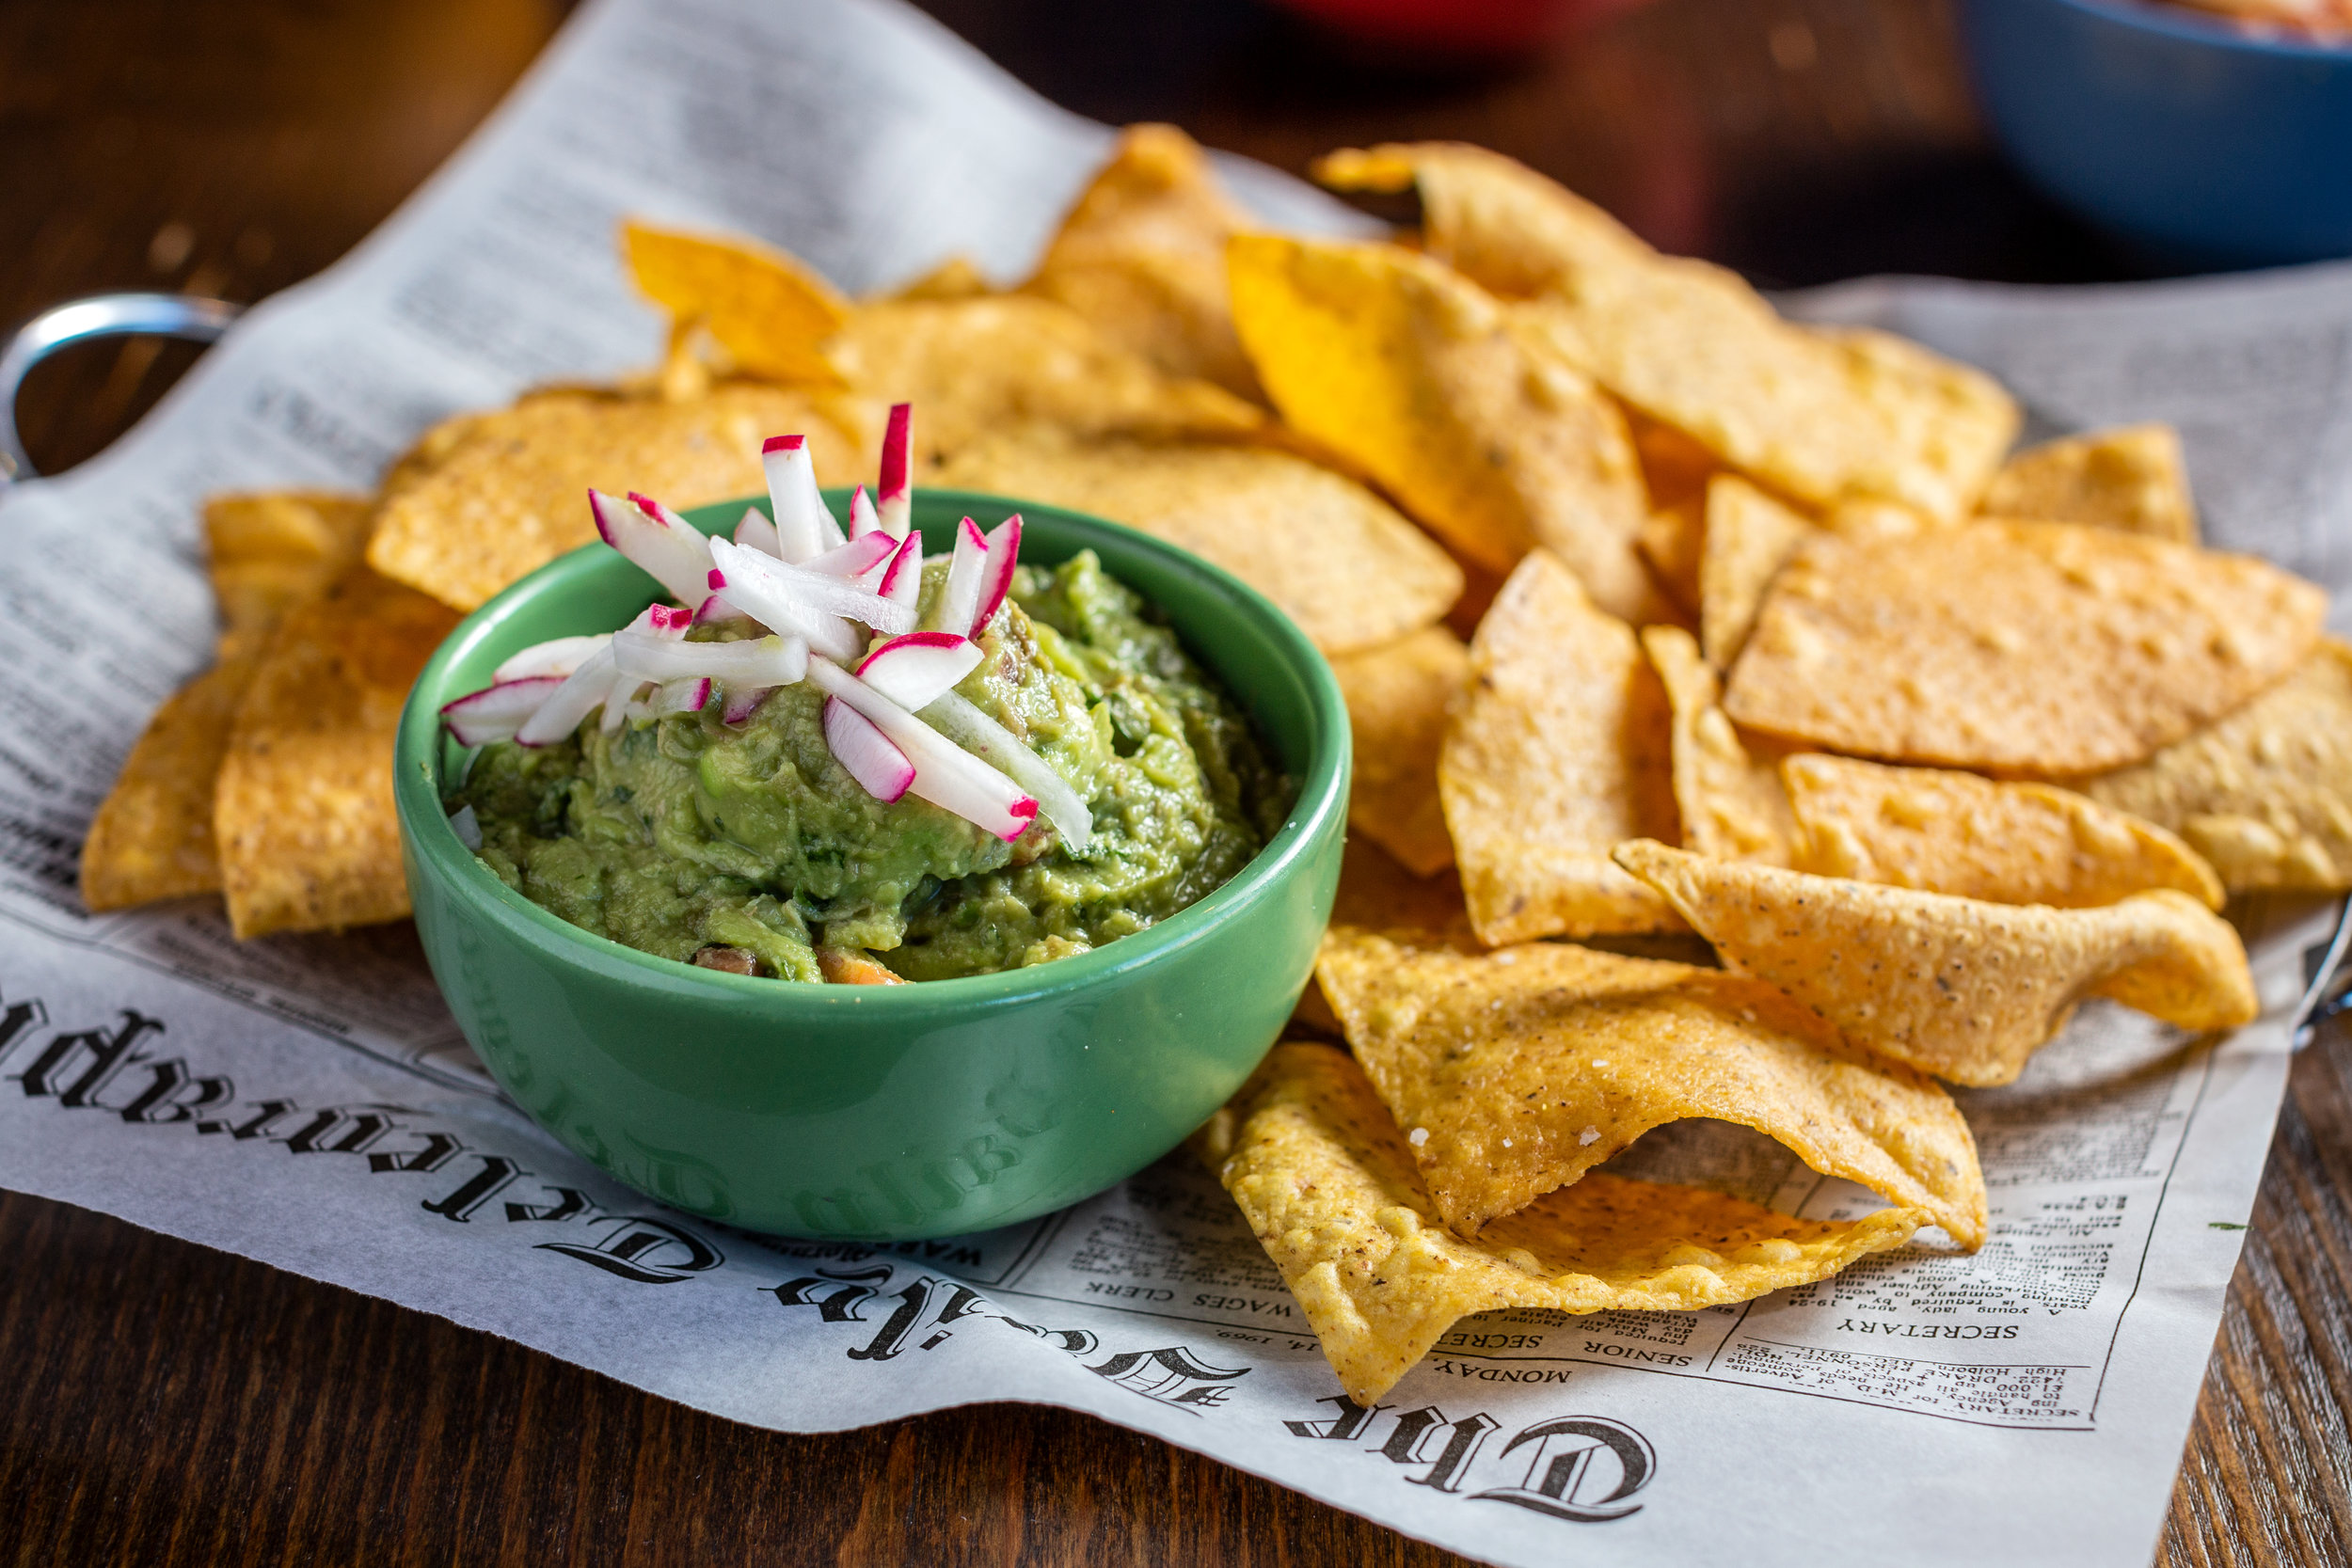 541973 guacamole and chips.jpg